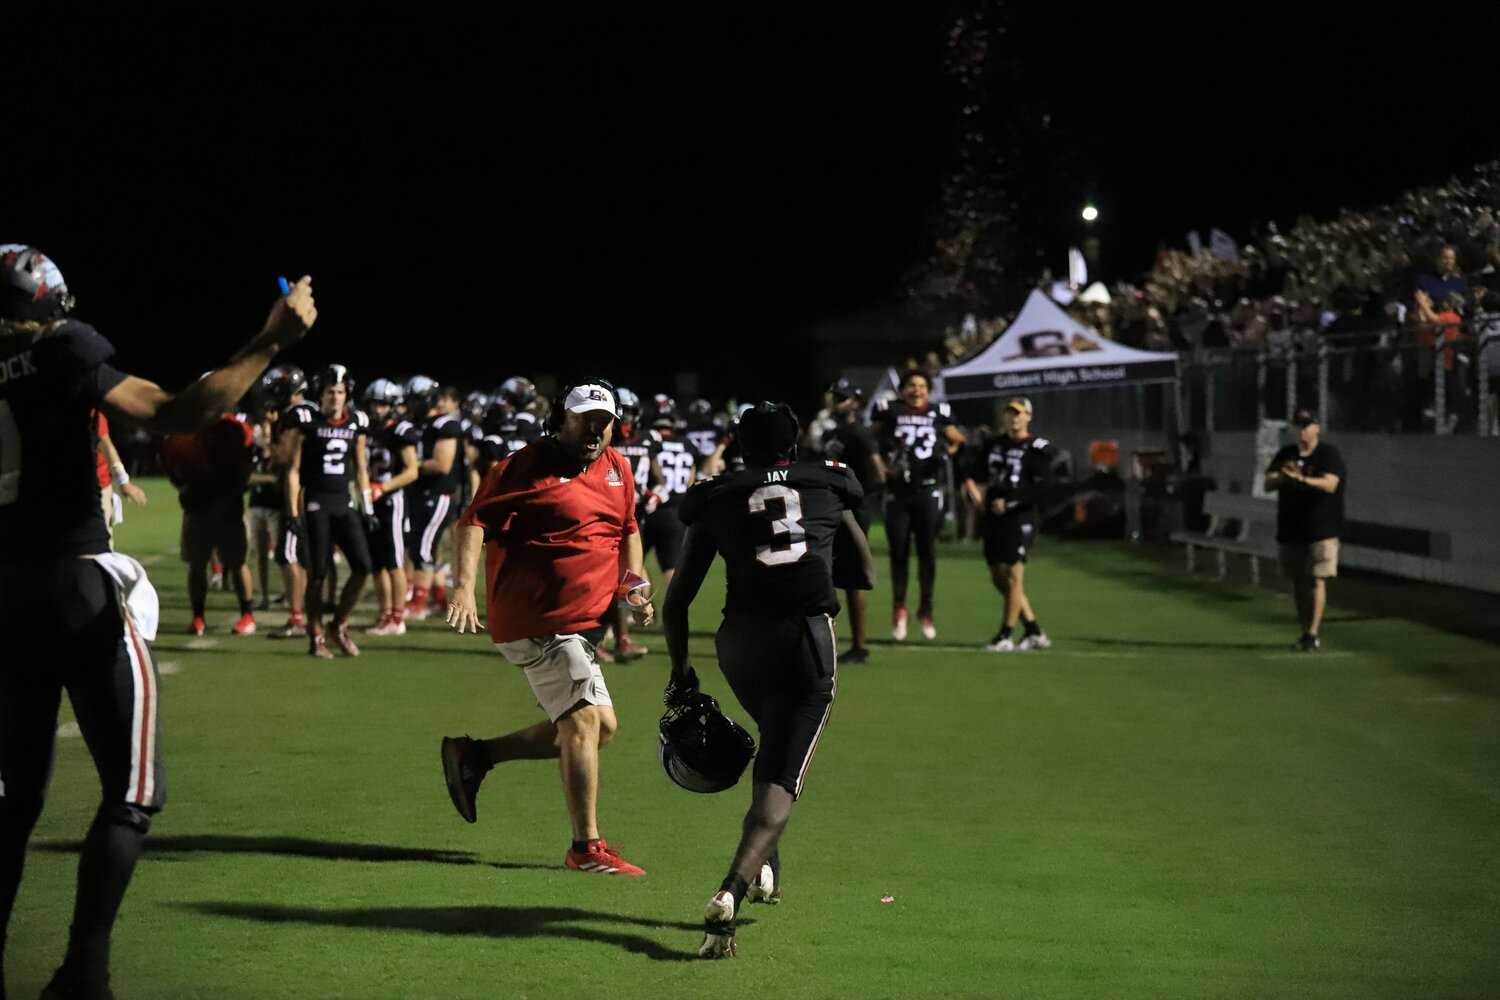 Gilbert running back Jaylen Jay runs to the sideline following his touchdown to give Gilbert the decisive 14-3 lead.